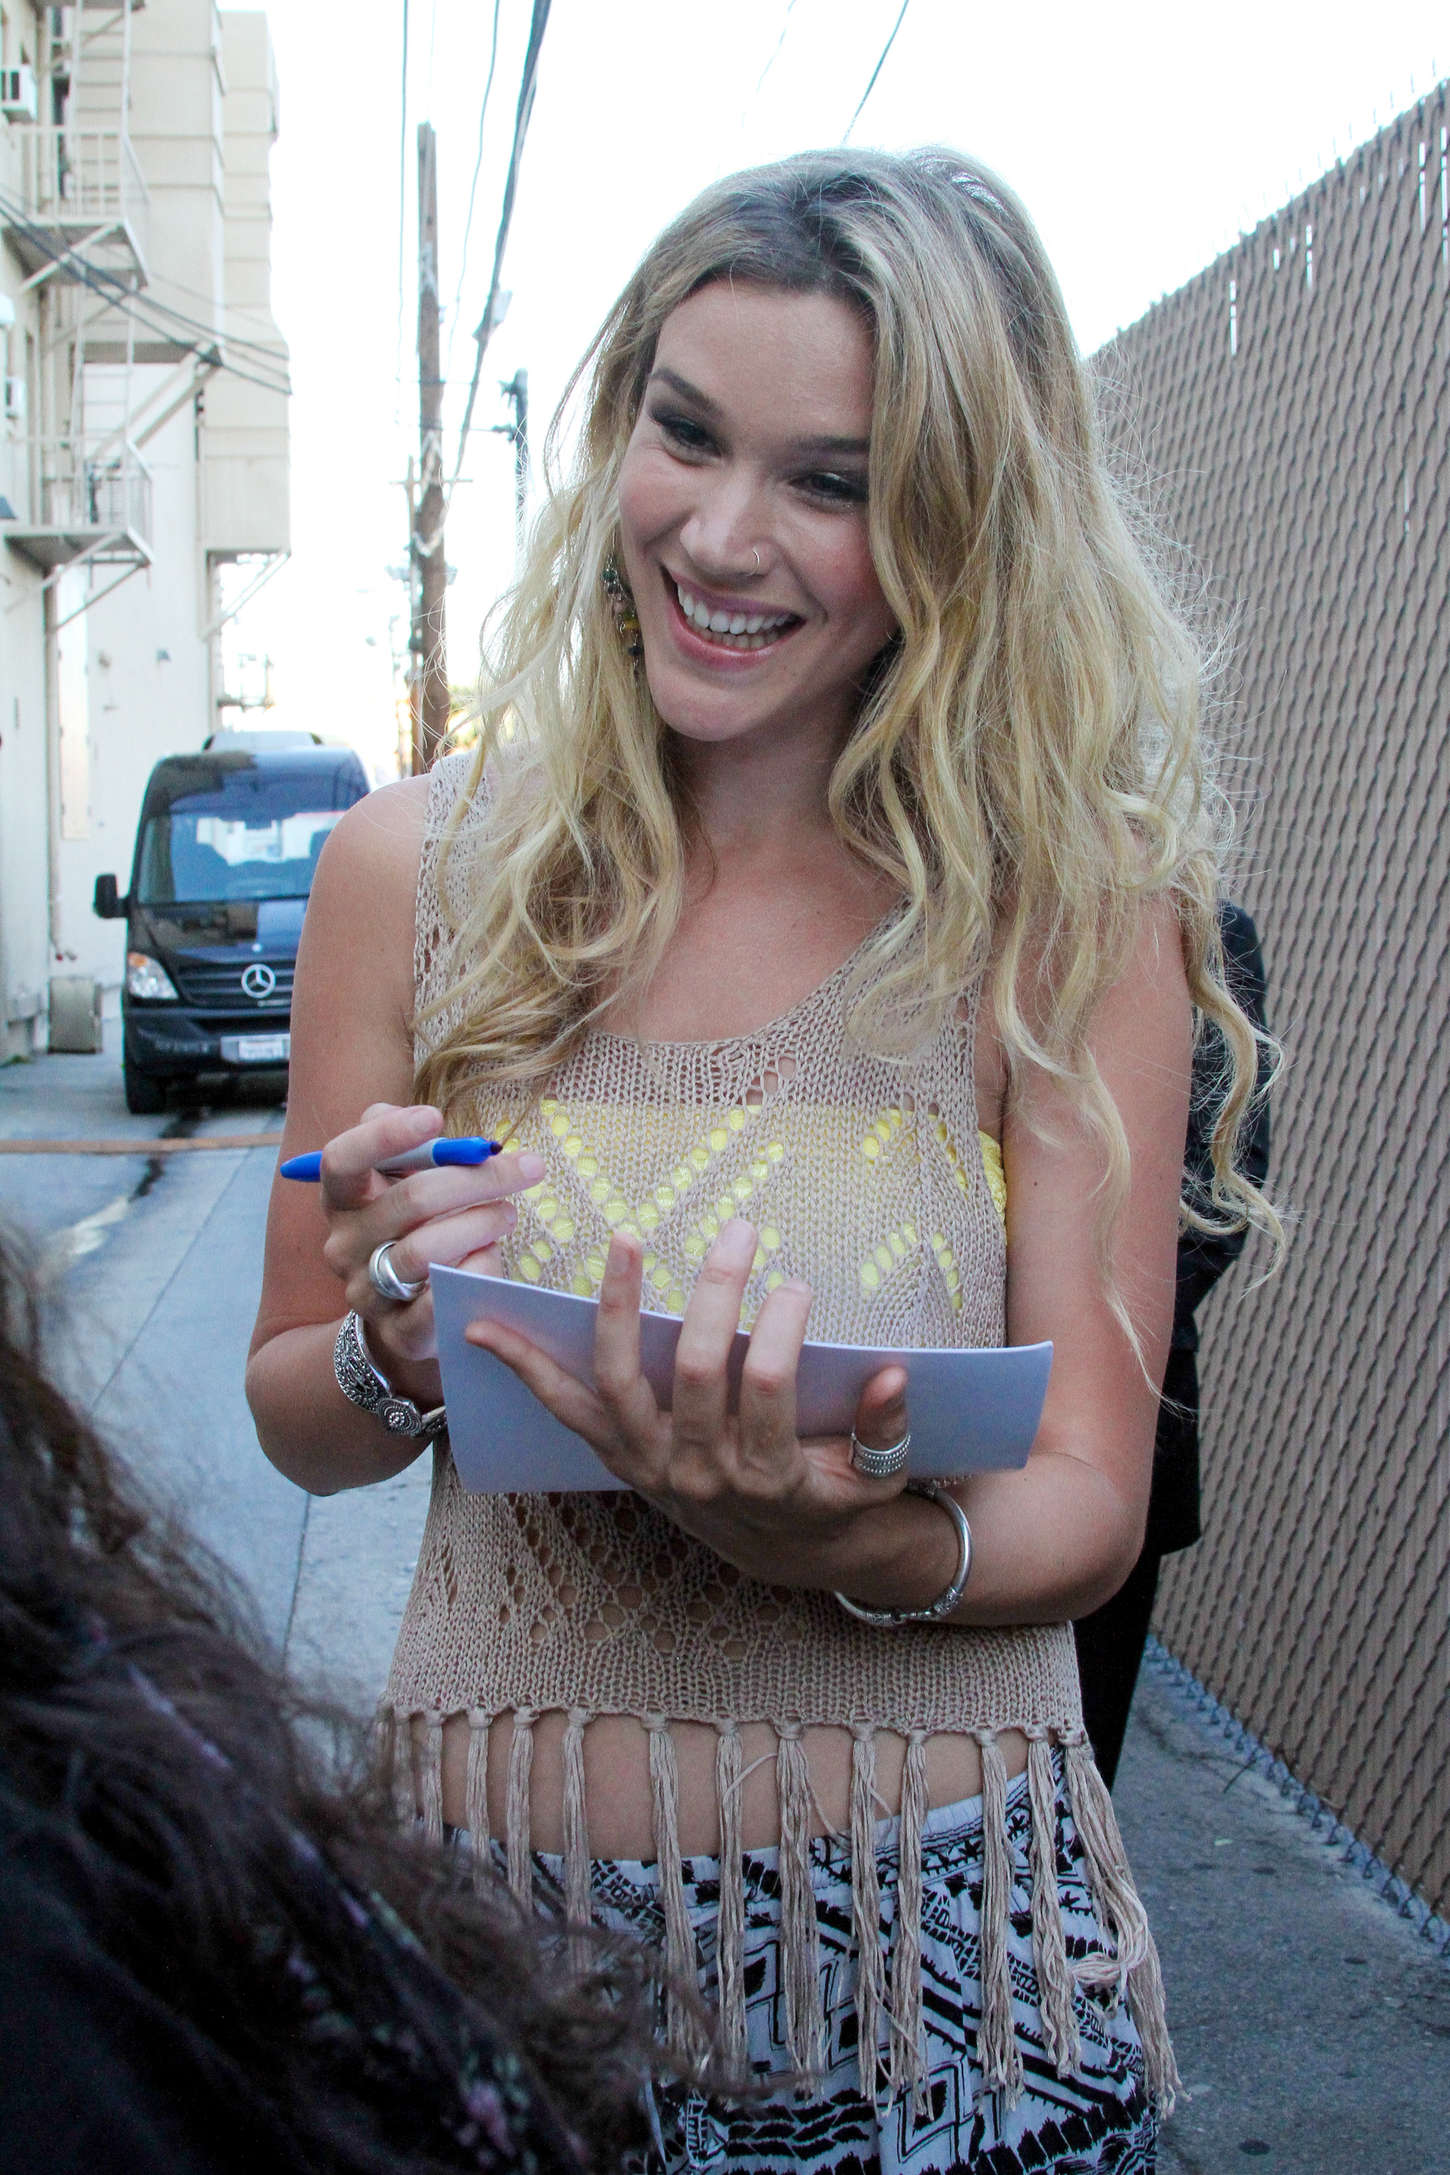 Joss Stone at the El Capitan Theatre at Jimmy Kimmel Live in Hollywood